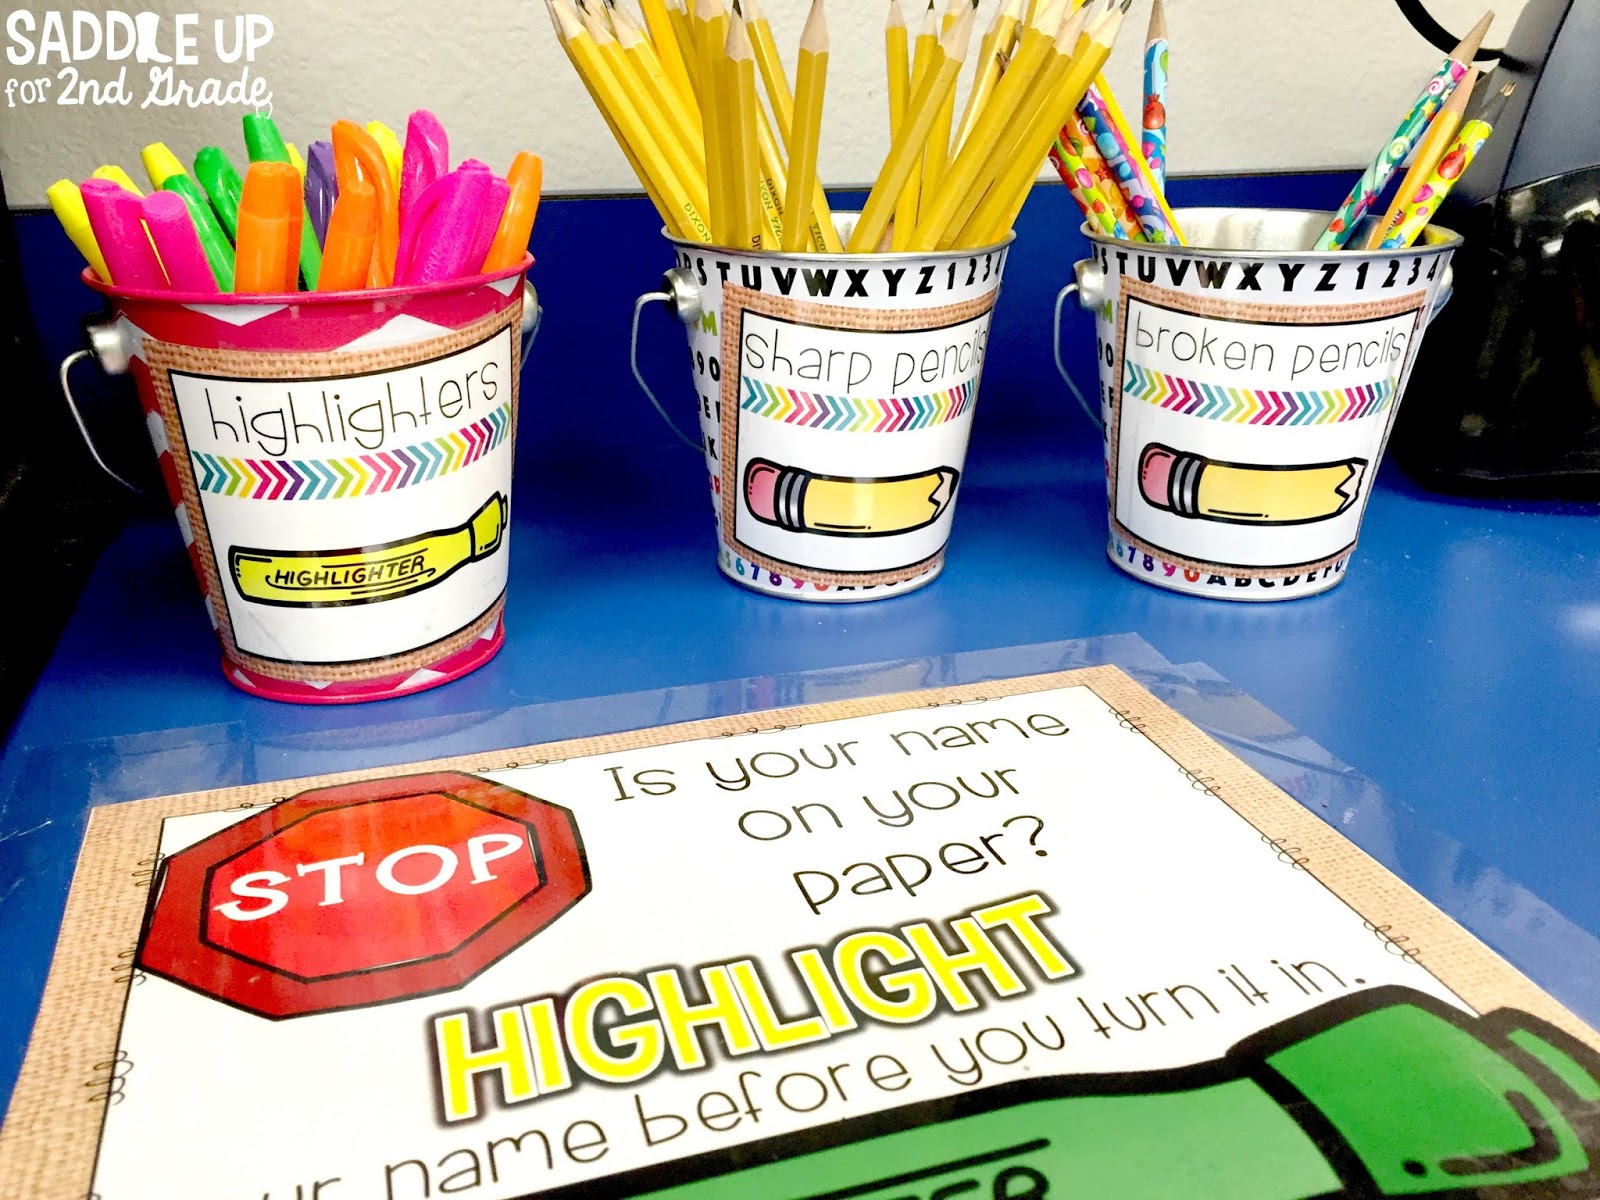 The blog posts features a tour of my 2nd grade classroom with a burlap and bright theme!